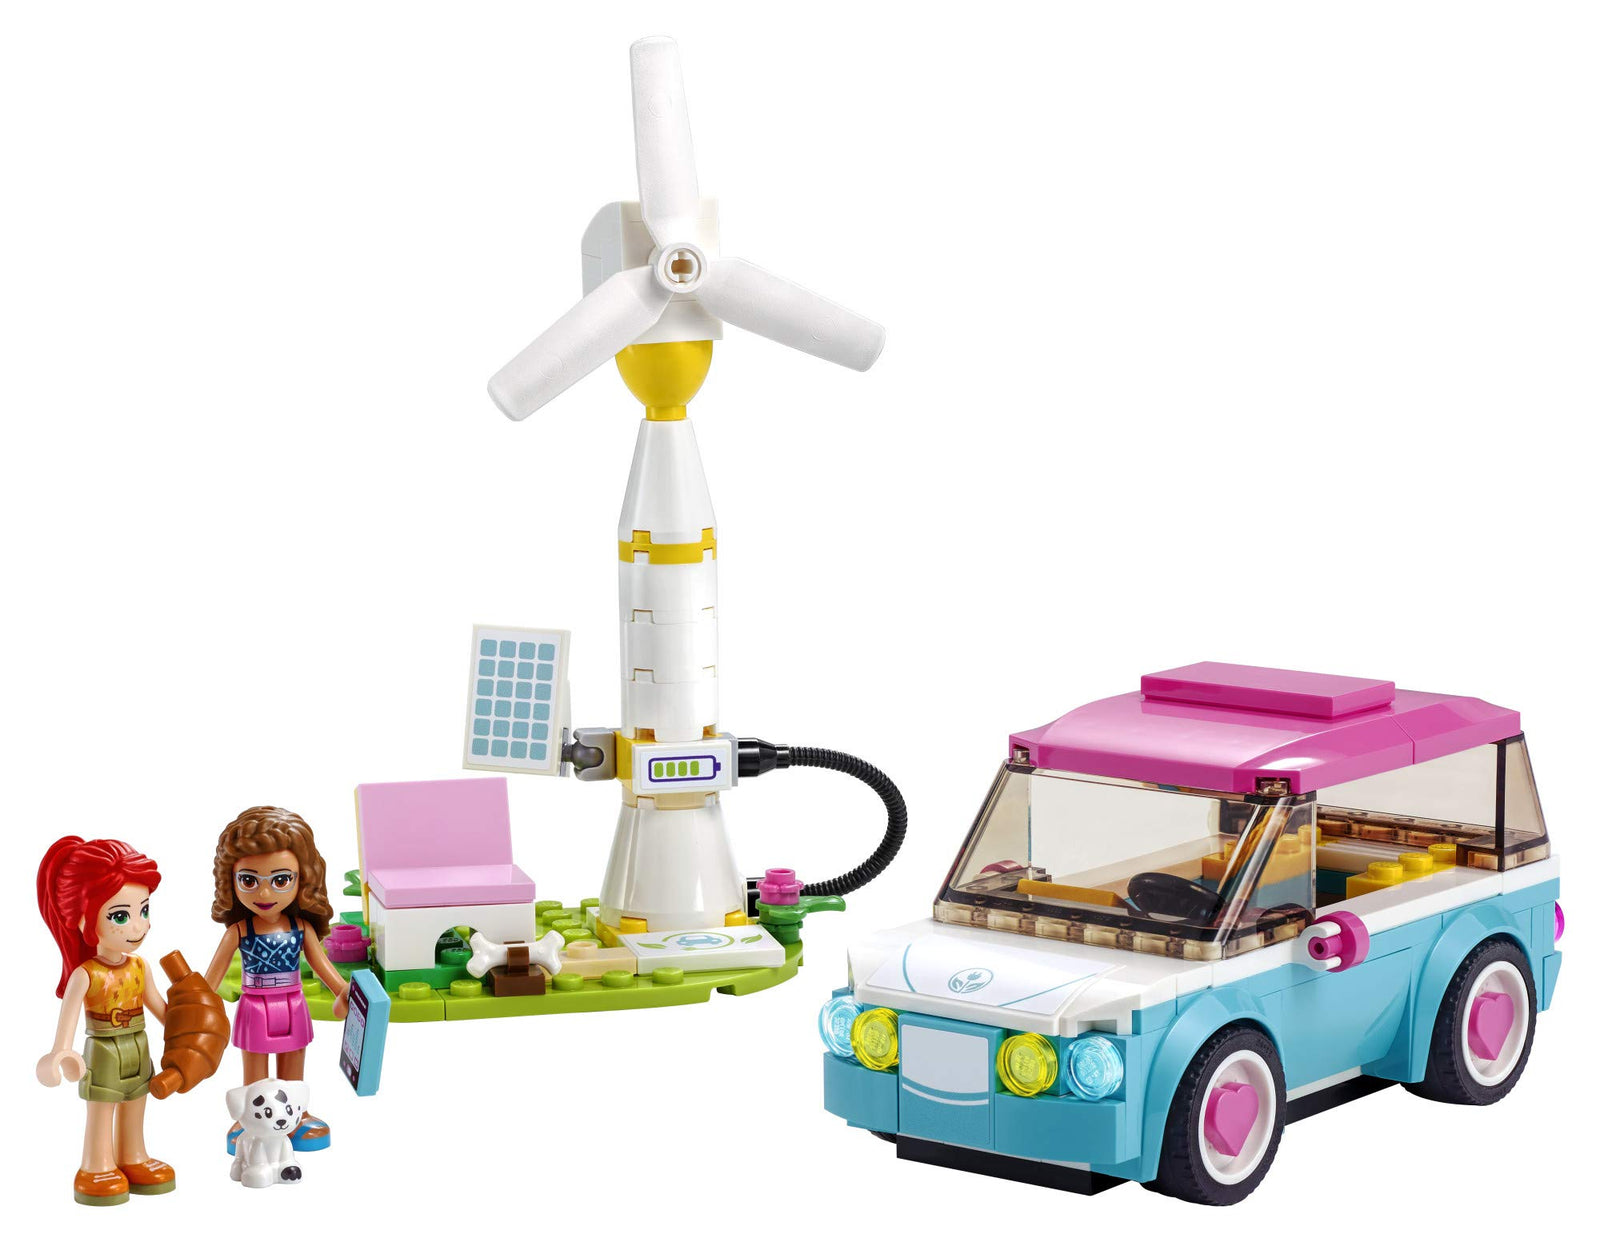 LEGO Friends Olivia's Electric Car 41443 Building Kit; Creative Gift for Kids; New Toy Inspires Modern Living Play, New 2021 (183 Pieces)